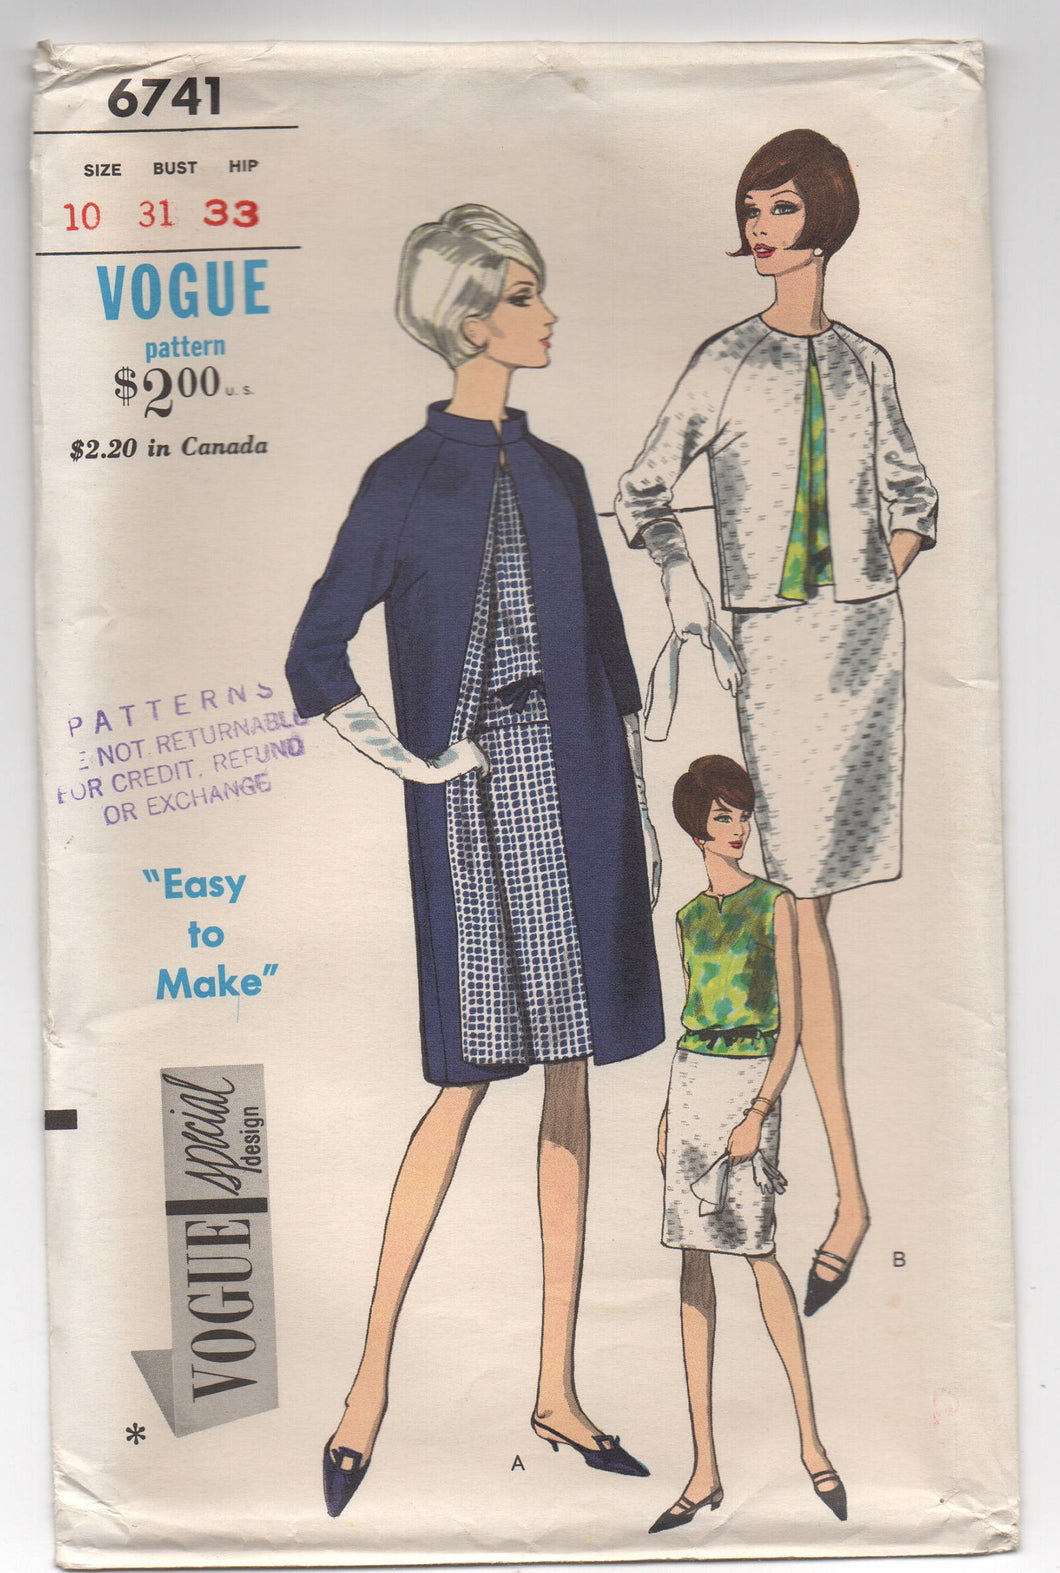 1960's Vogue Special Design Skirt, Jacket and Coat Pattern - Bust 31